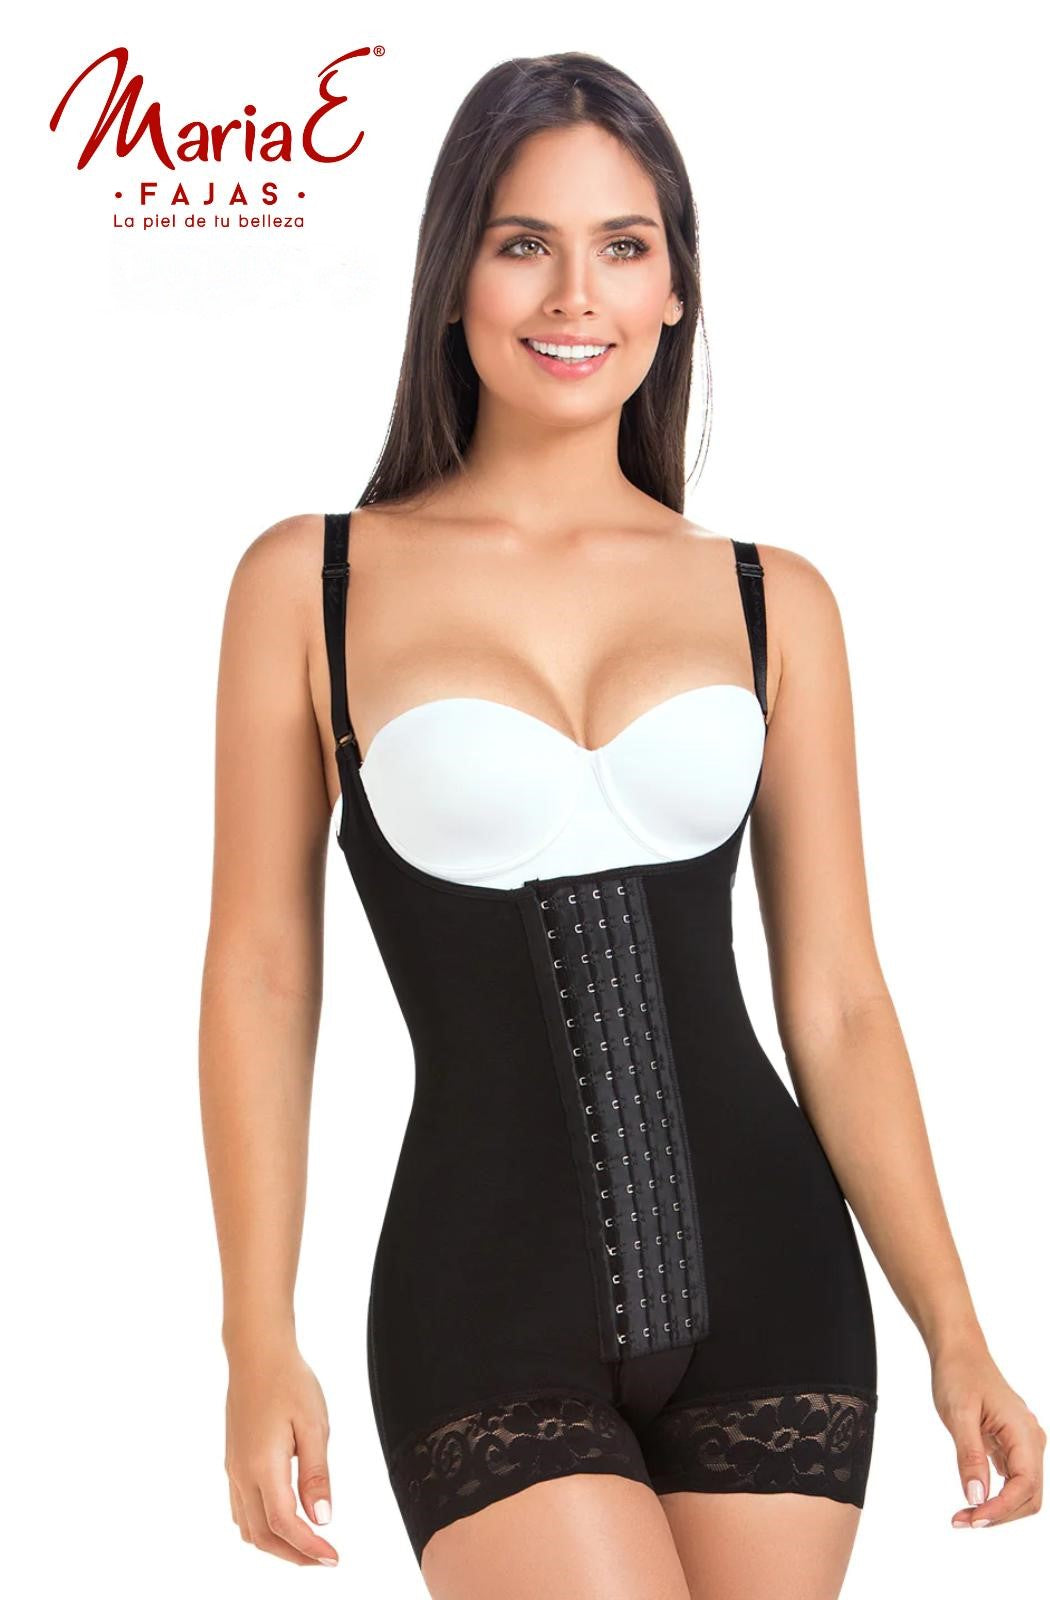 MARIA BLACK GIRDLE FOR DAILY USE POST SURGICAL POST BIRTH REDUCES UP TO 4 SIZES